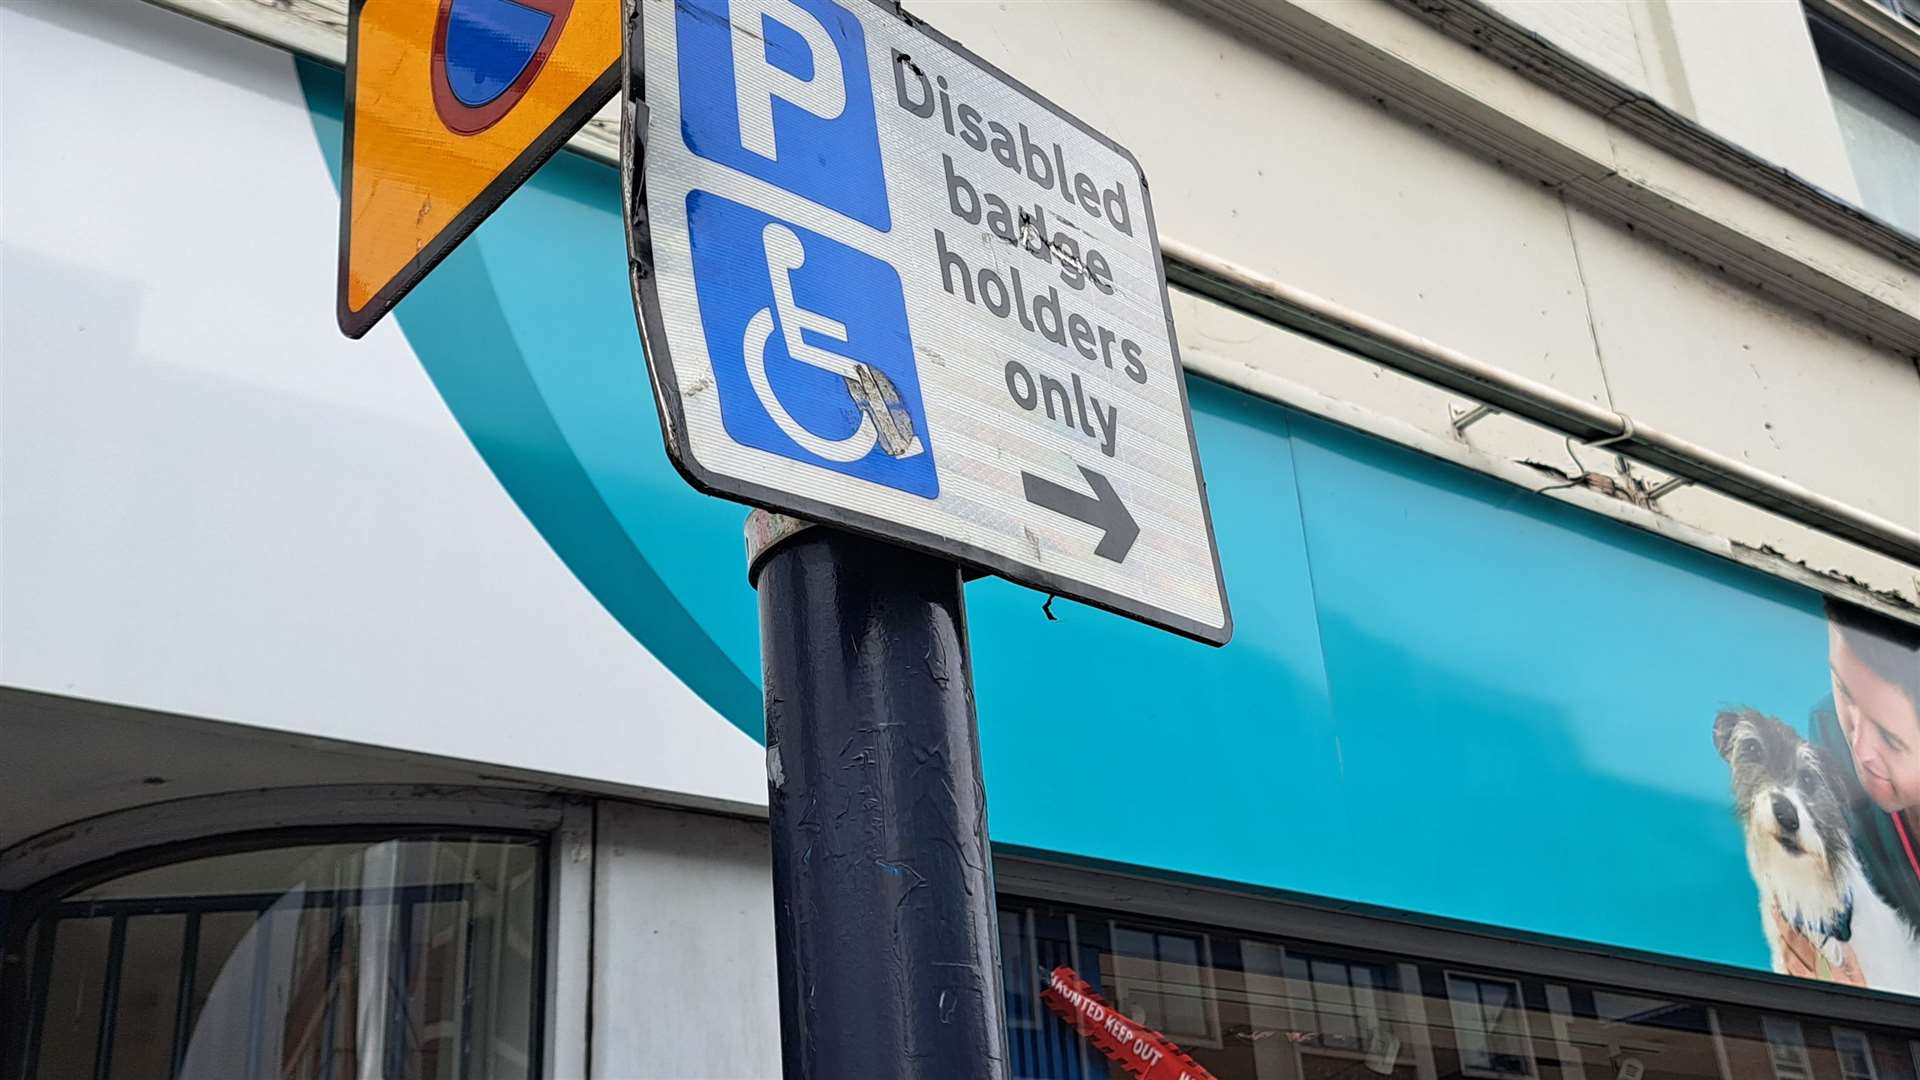 There are disabled bays within the zone, which may cause a problem